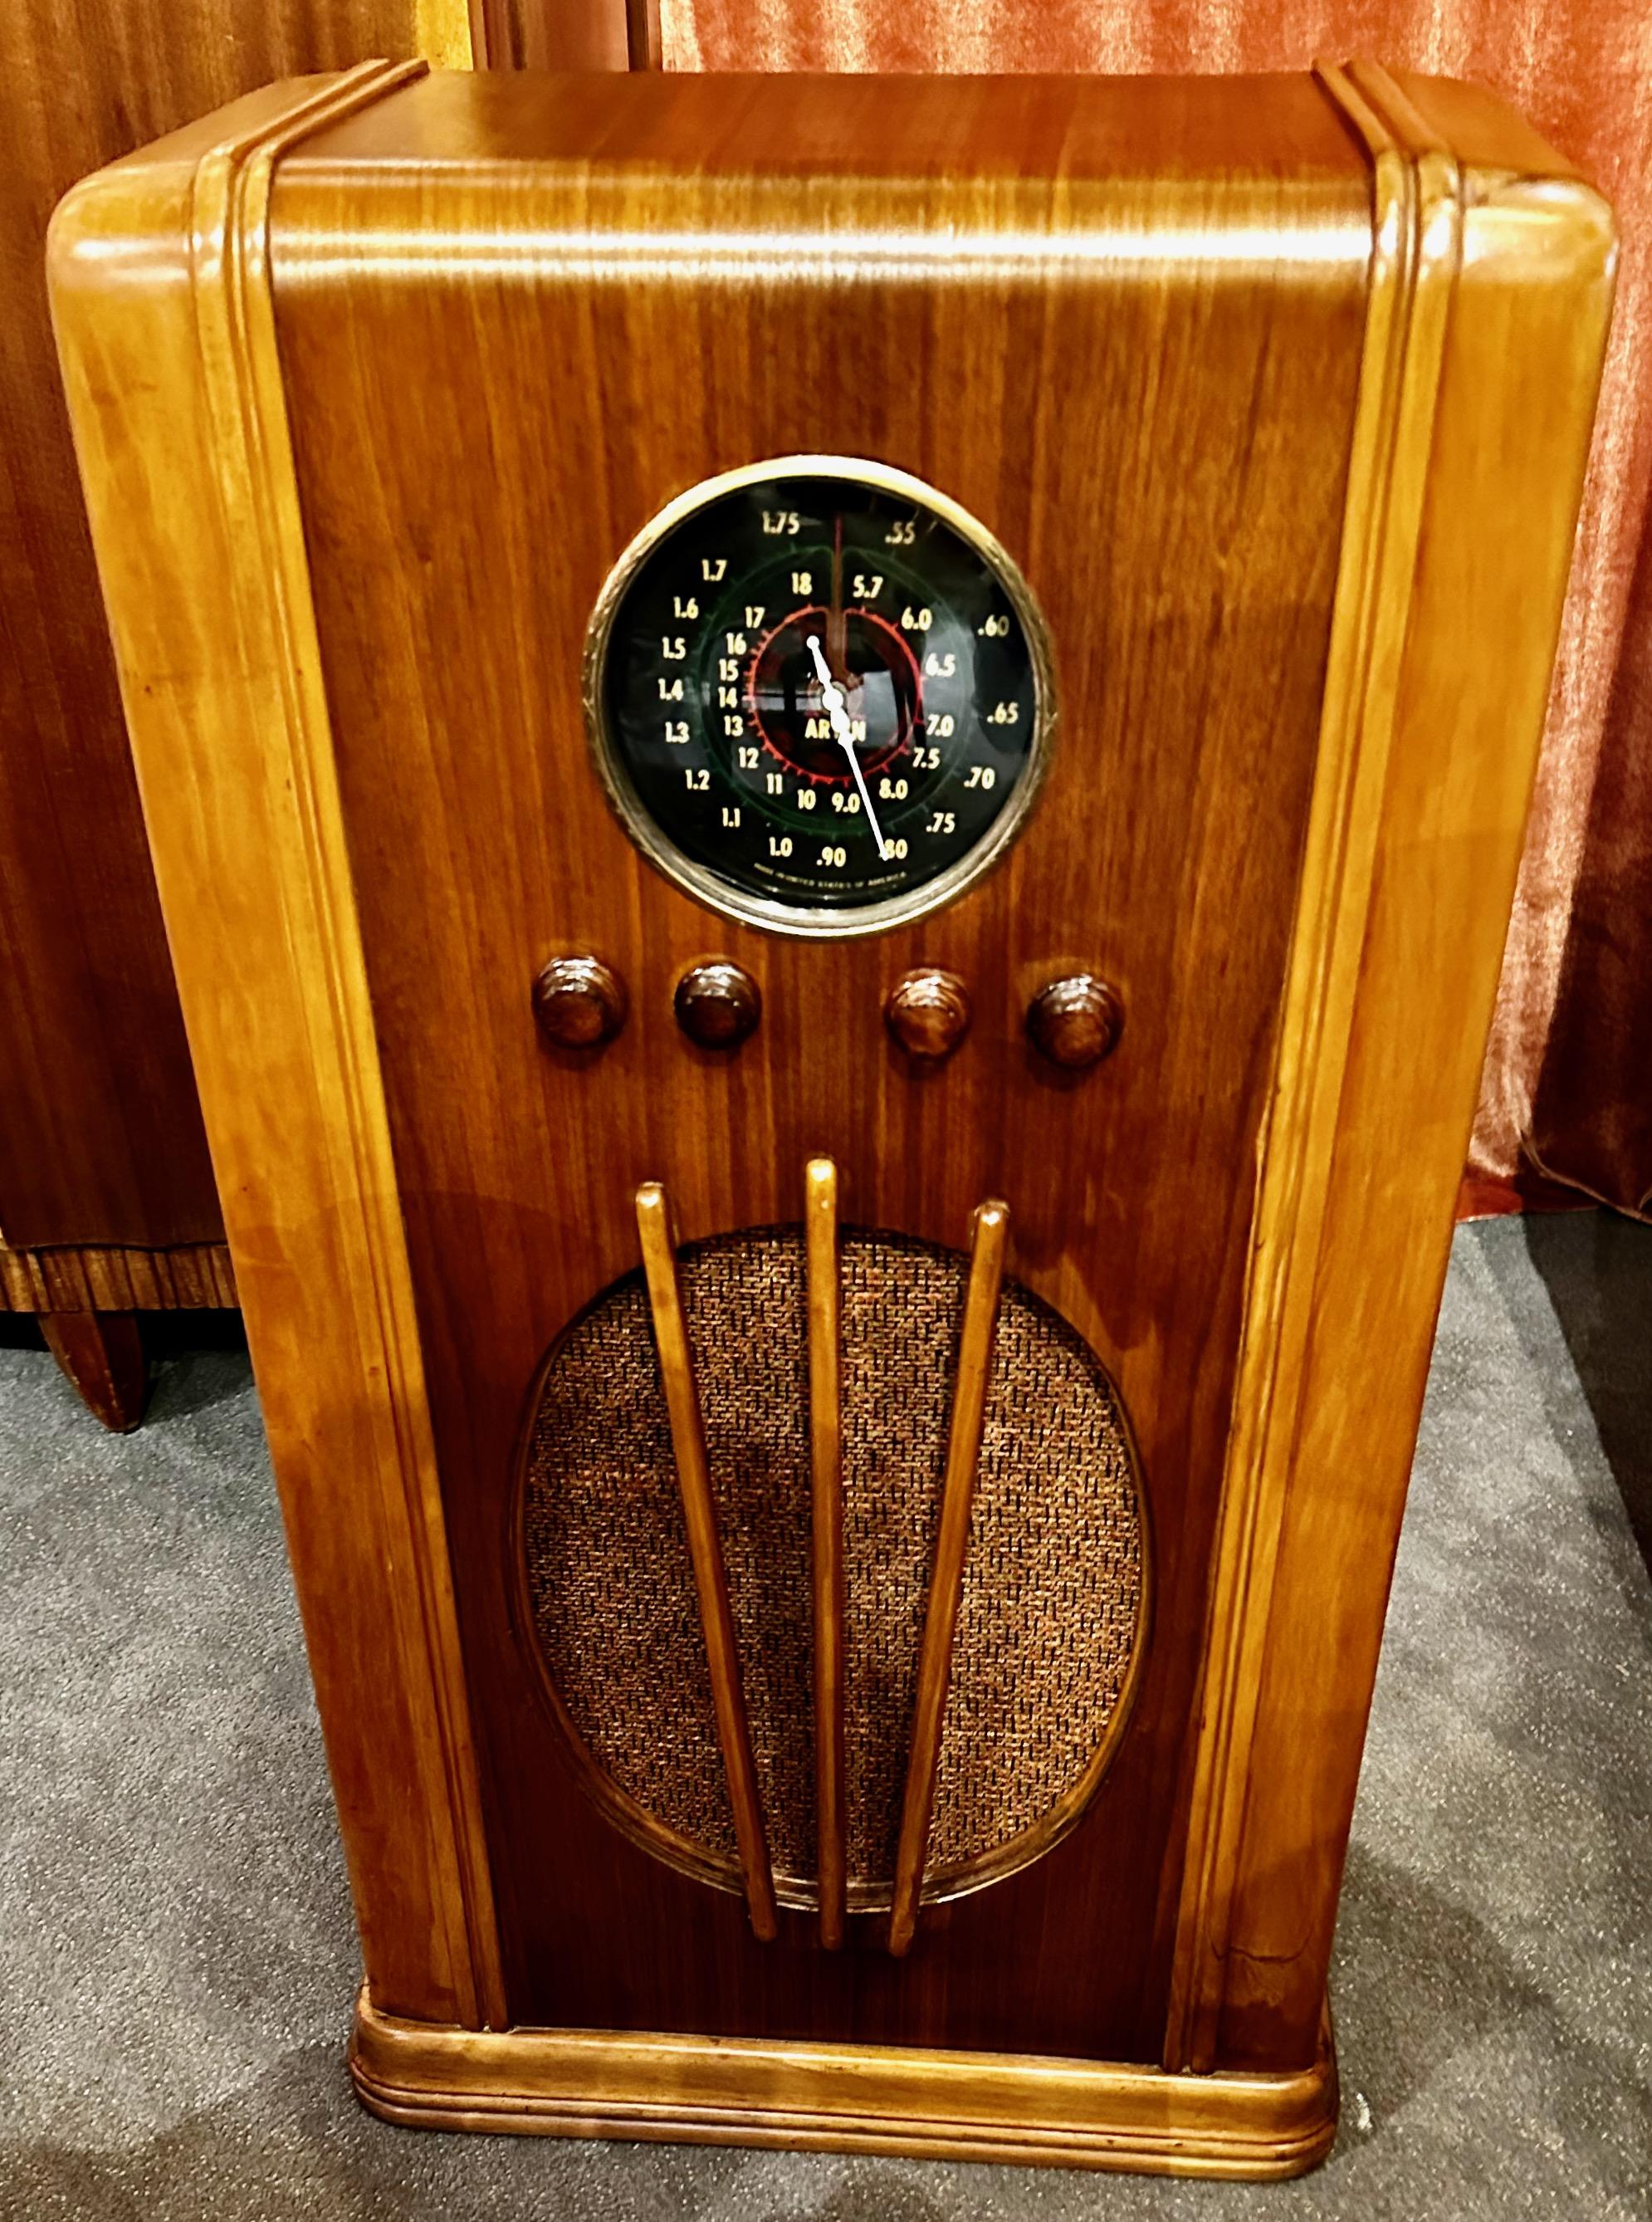 Arvin Model 527 Rhythm Senior Console Radio Bluetooth.  The Rhythm Series was introduced in 1936.  Some of the most beautiful and uncommon of all the Arvin sets are included in this series. Manufactured by Noblitt-Sparks Industries, this rather